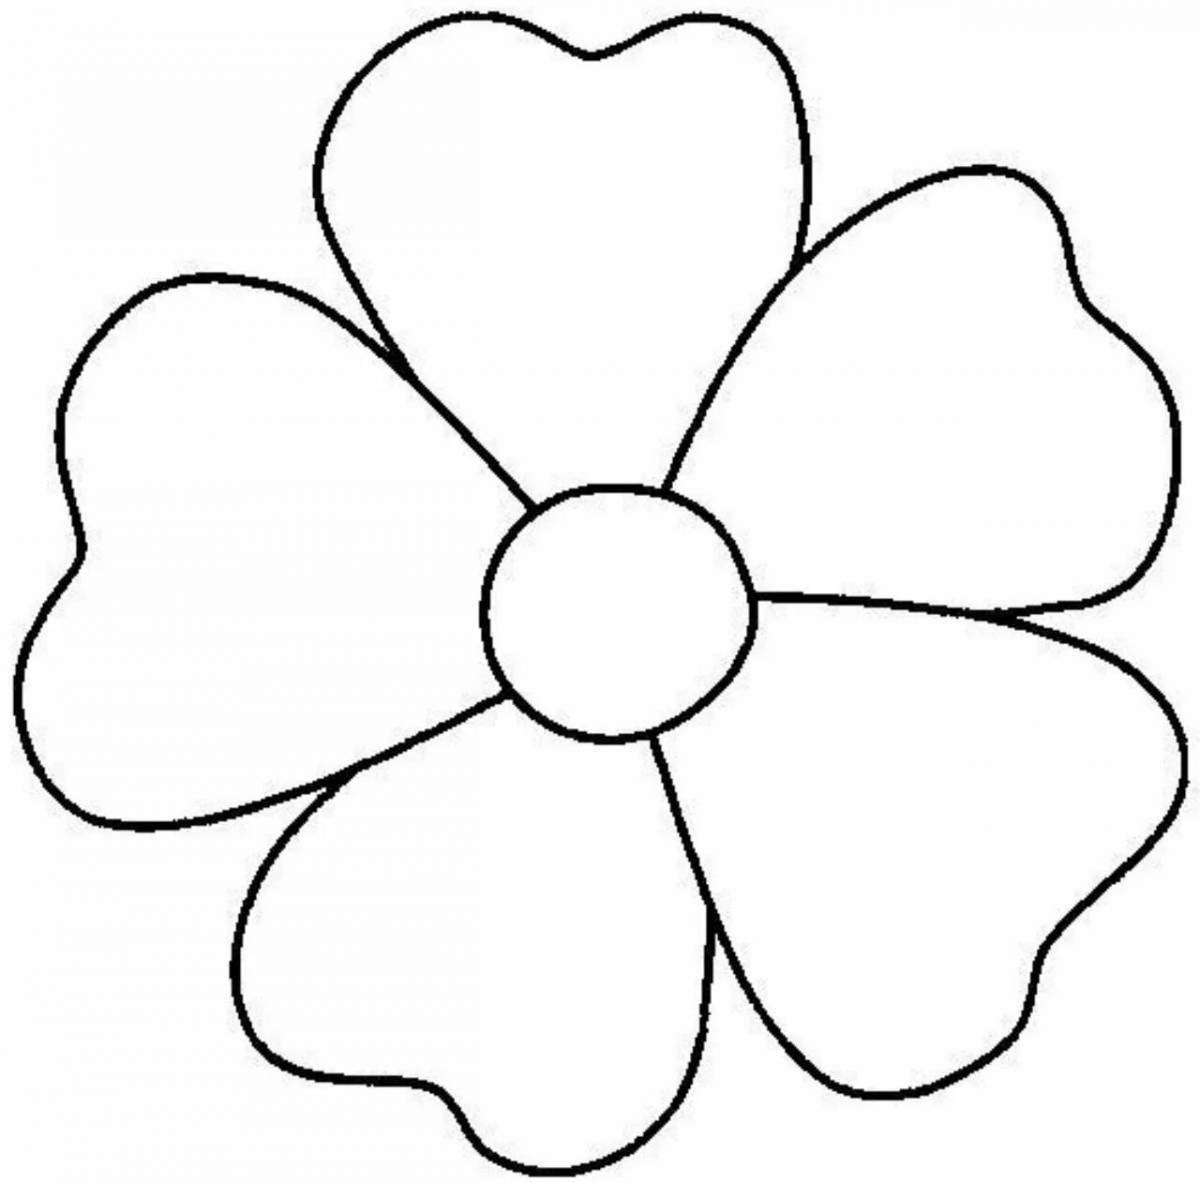 Blissful coloring flower without a stem